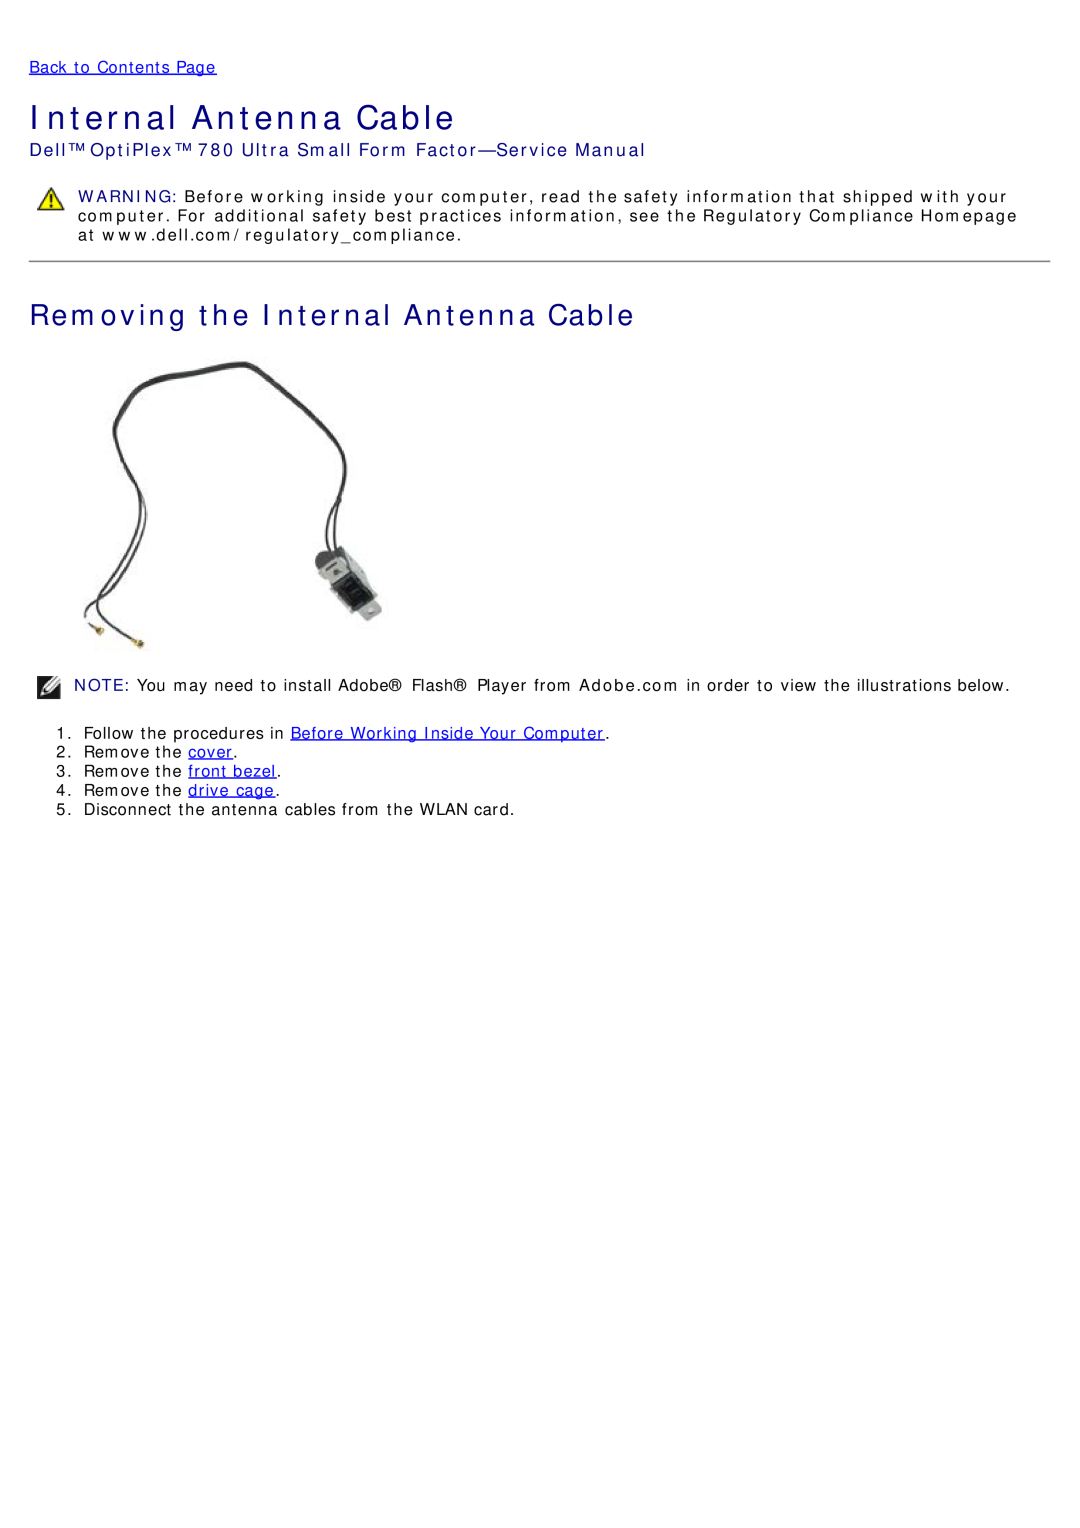 Dell service manual Removing the Internal Antenna Cable, Dell OptiPlex 780 Ultra Small Form Factor-Service Manual 